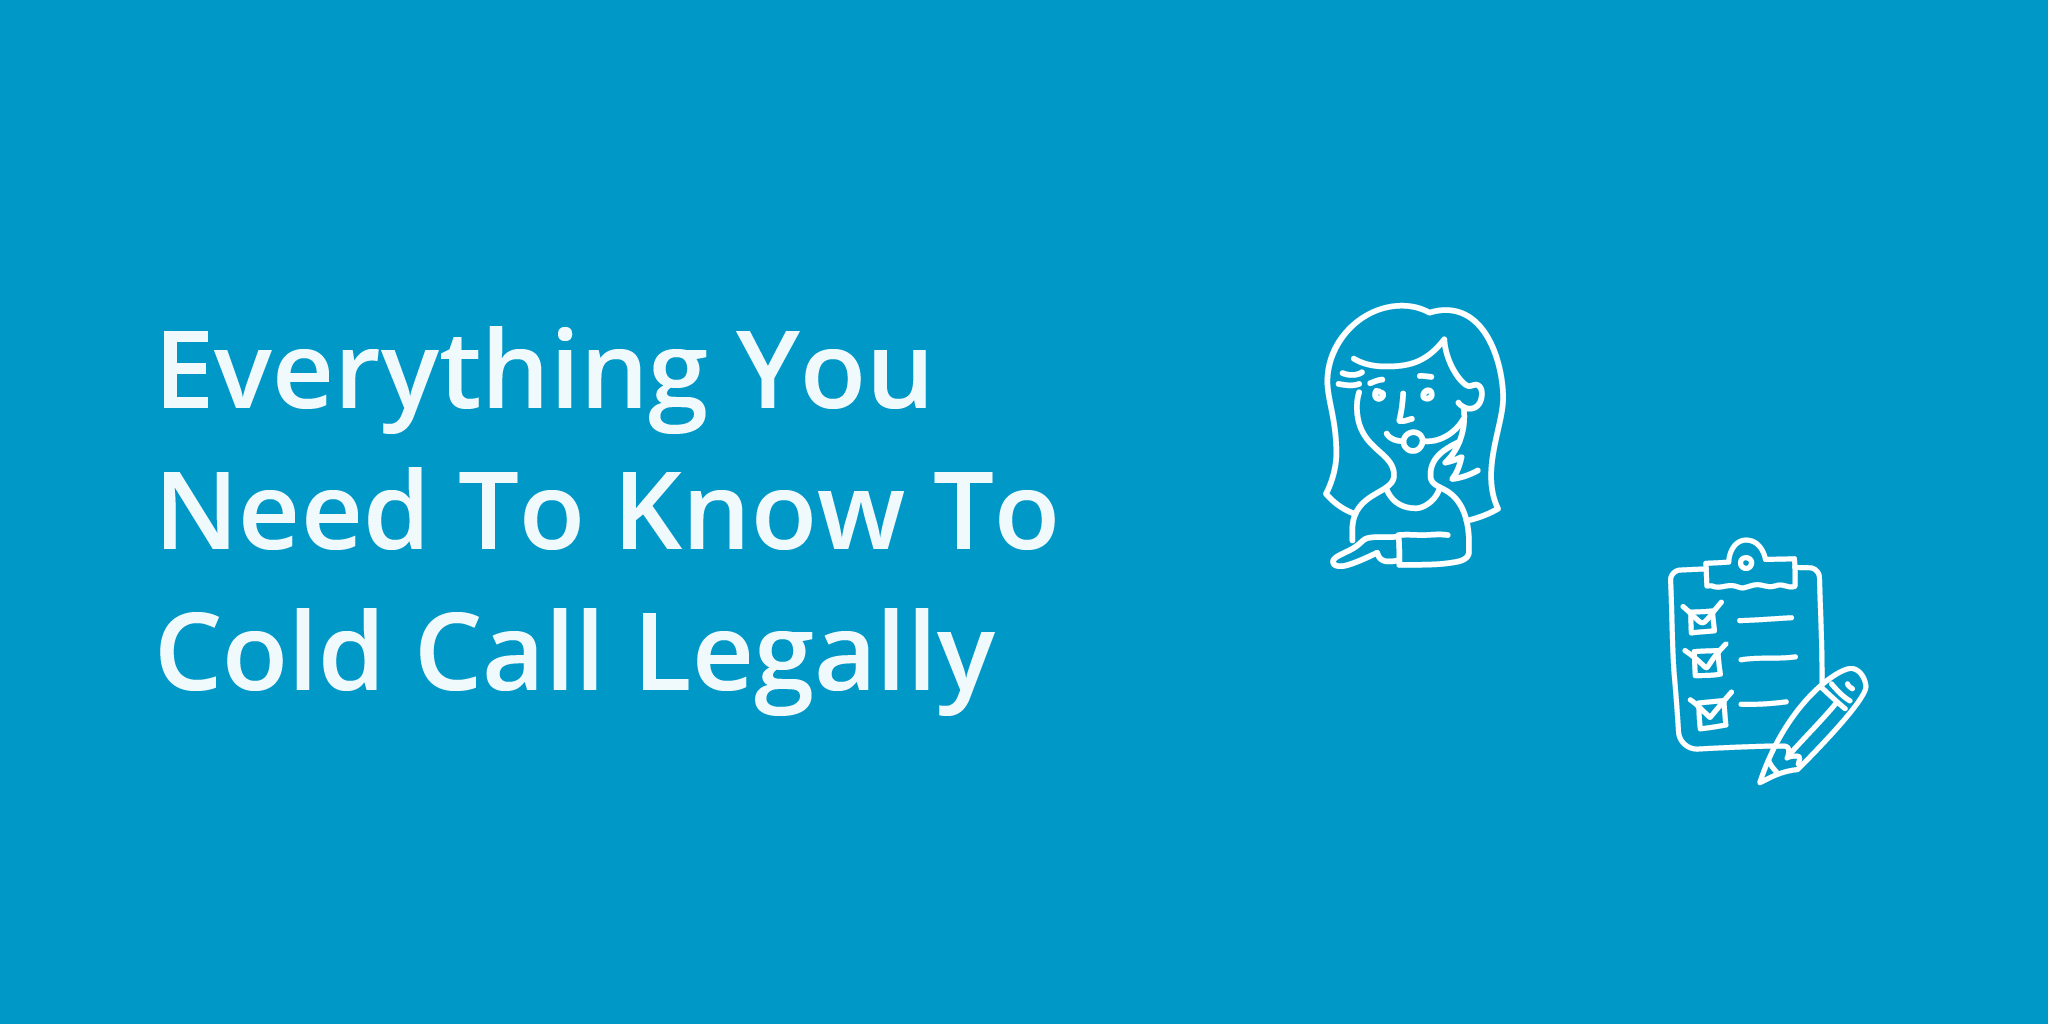 Everything You Need To Know To Cold Call Legally